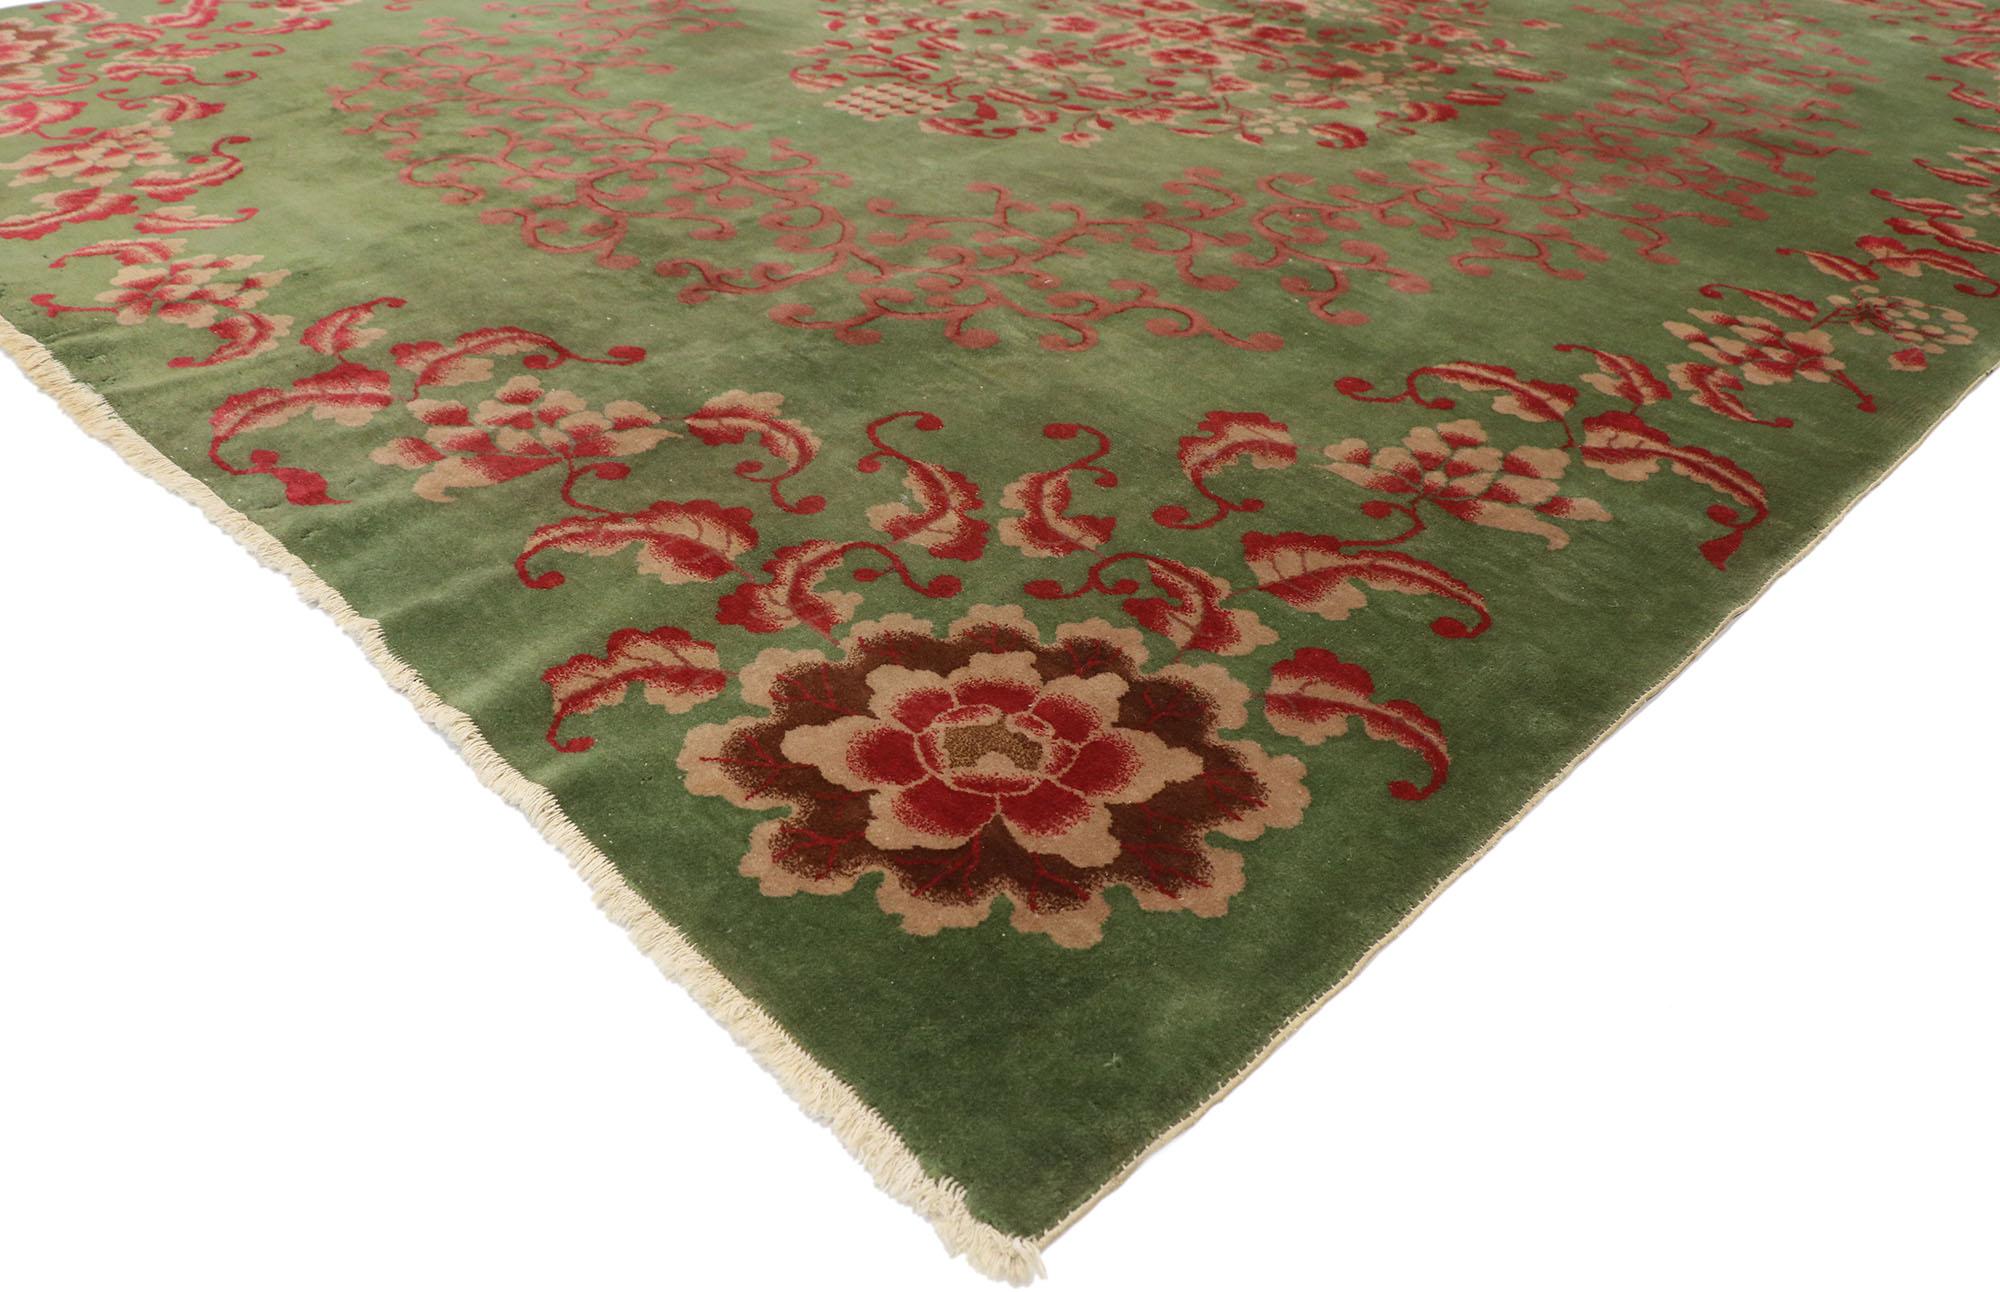 77624, antique Chinese green Art Deco Rug with Qing dynasty style 09'00 x 11'04. This hand-knotted wool antique Chinese Art Deco rug features a rounded open center medallion decorated with Chrysanthemum, peonies, cherry blossoms, lotuses, and leafy